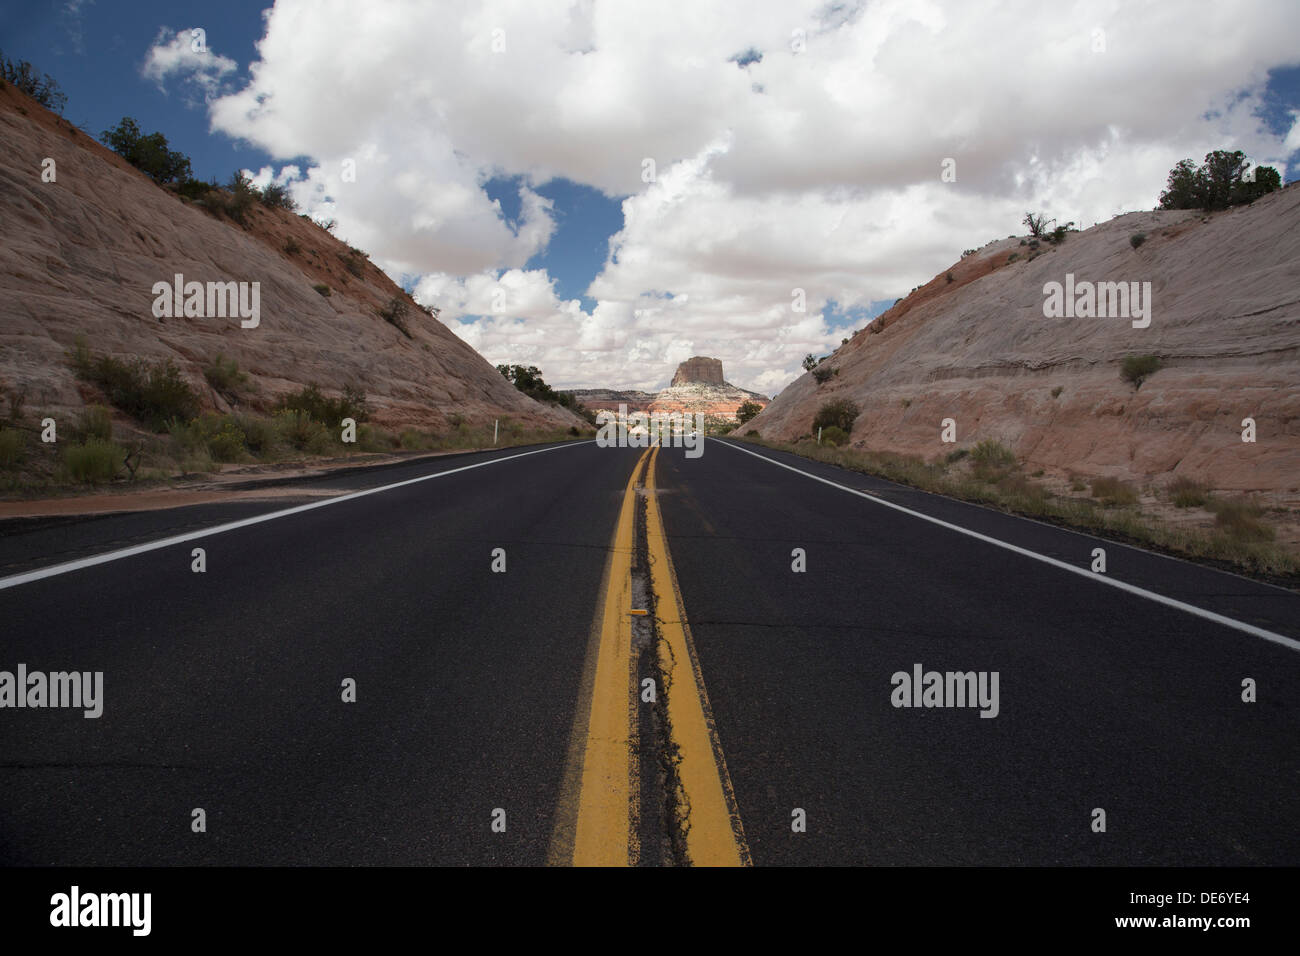 highway 98 square butte navajo reservation arizona Stock Photo